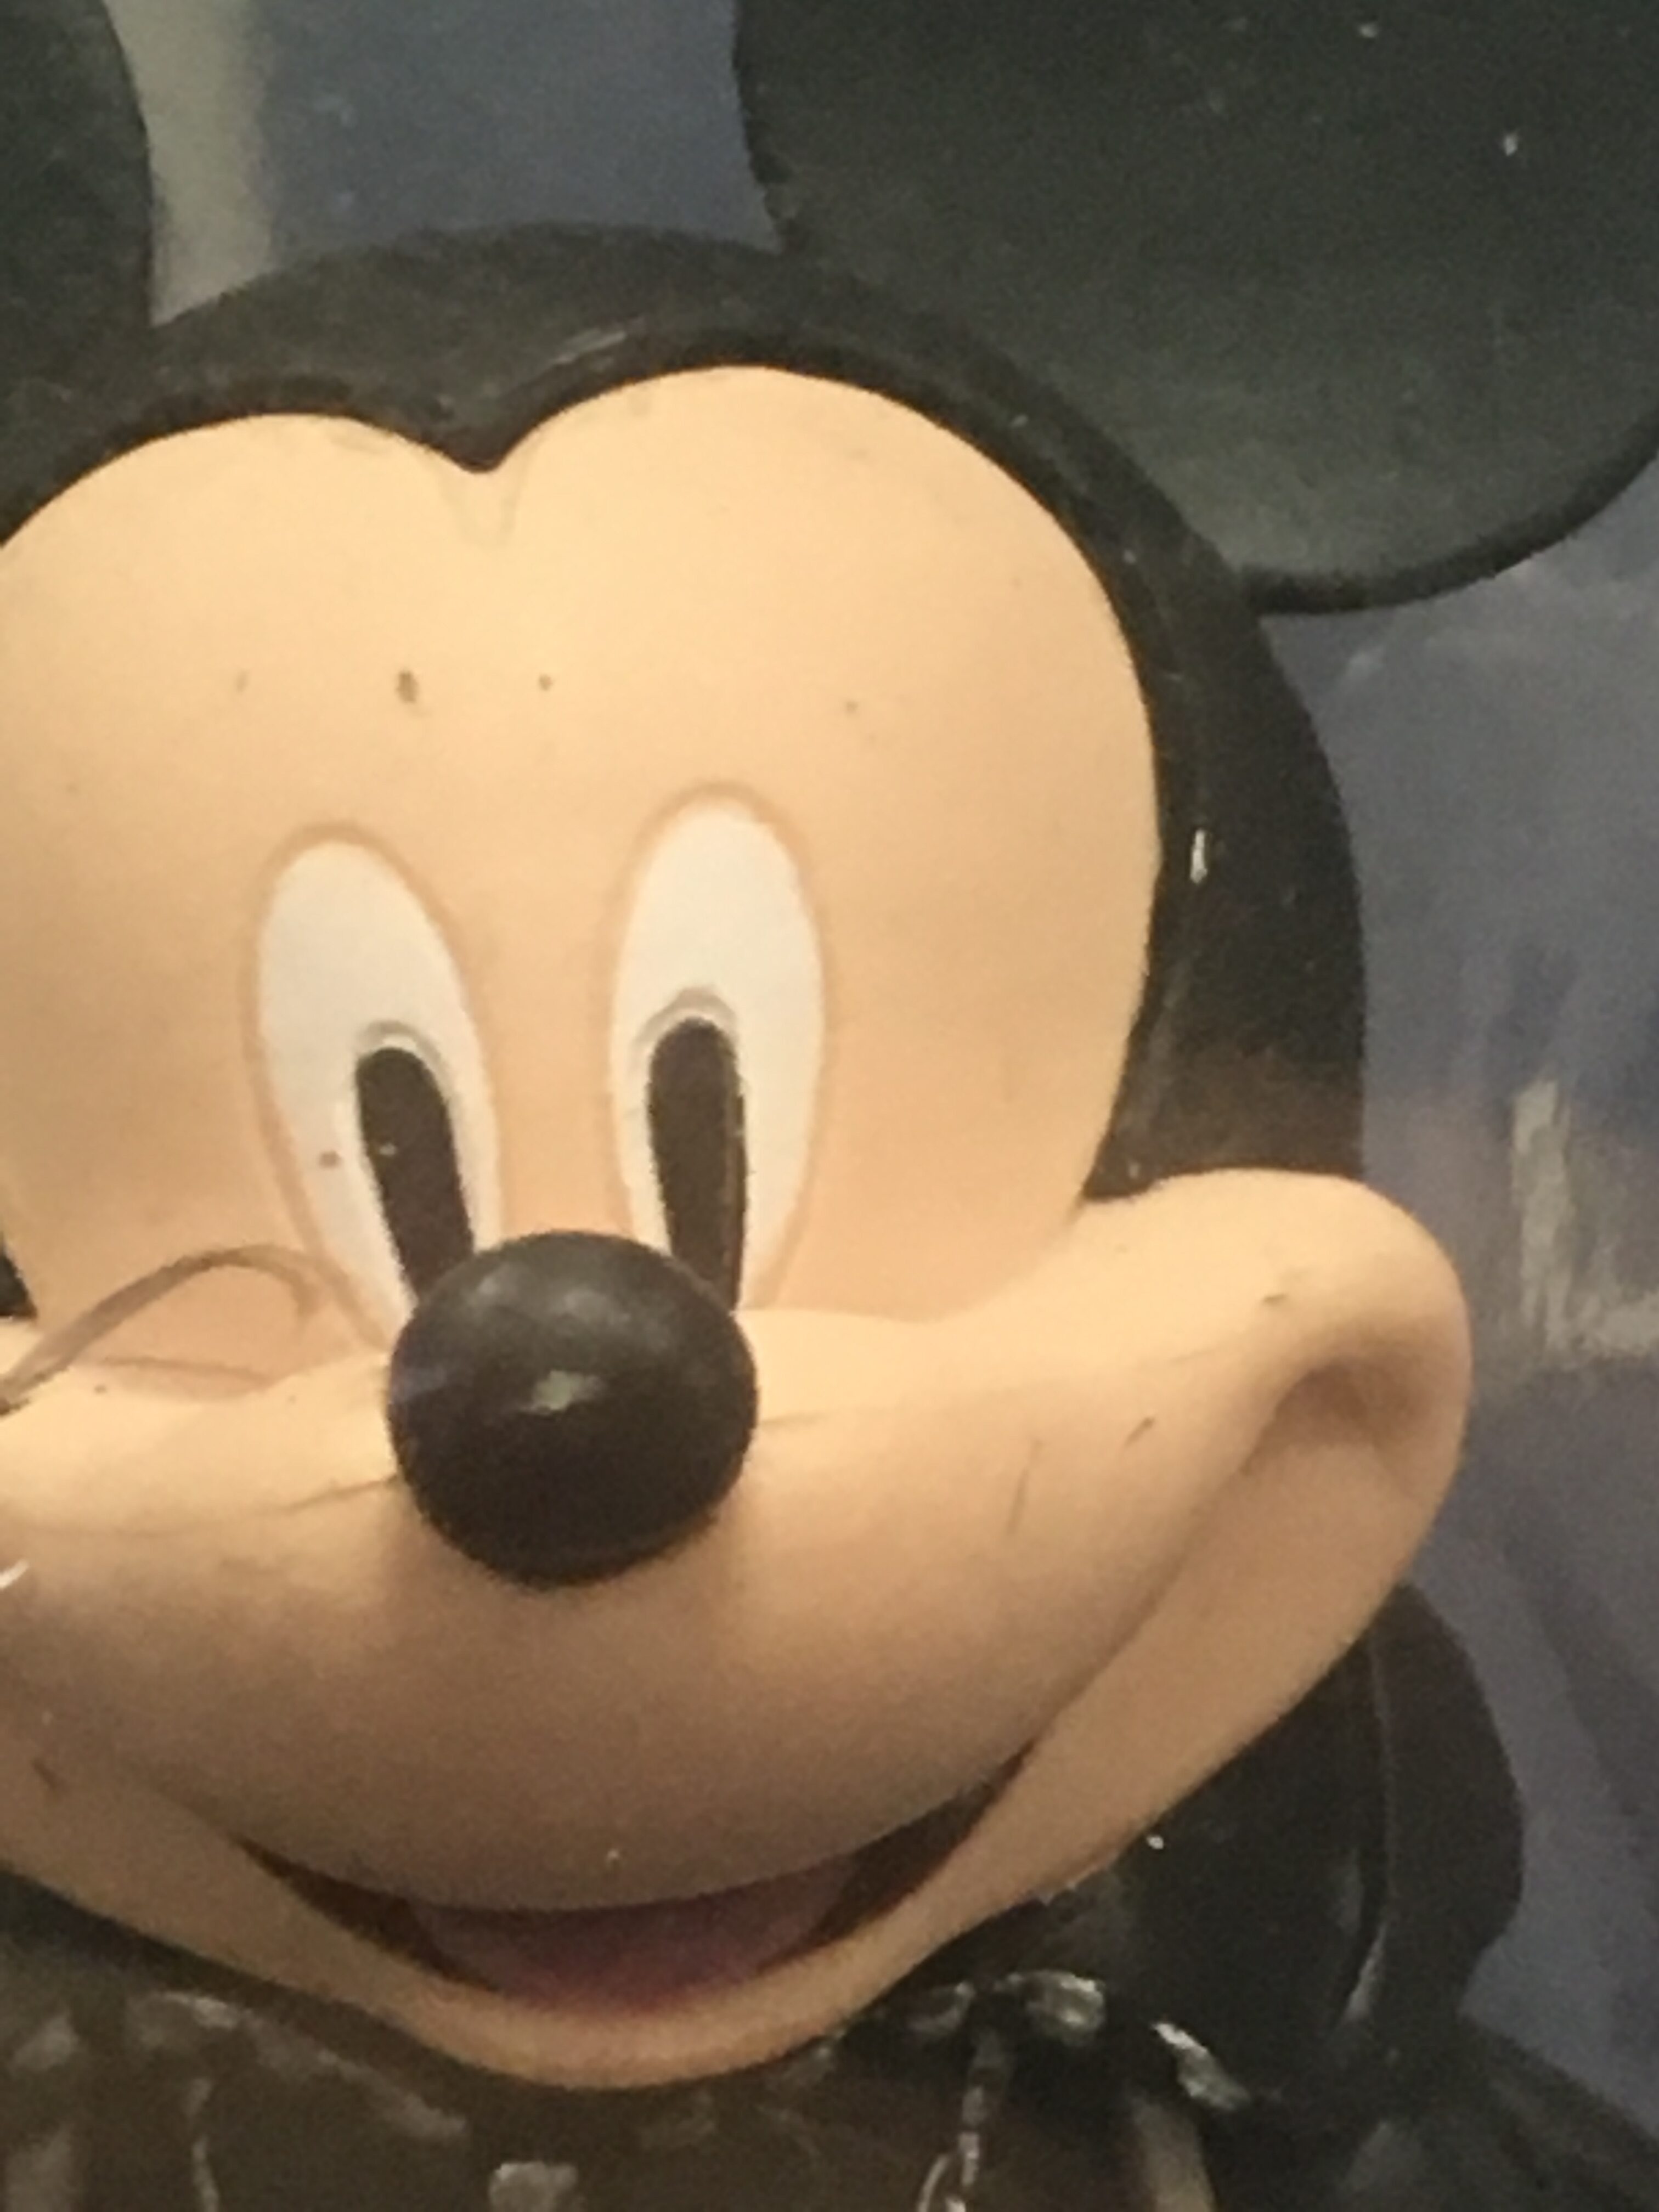 Scary Mickey Mouse